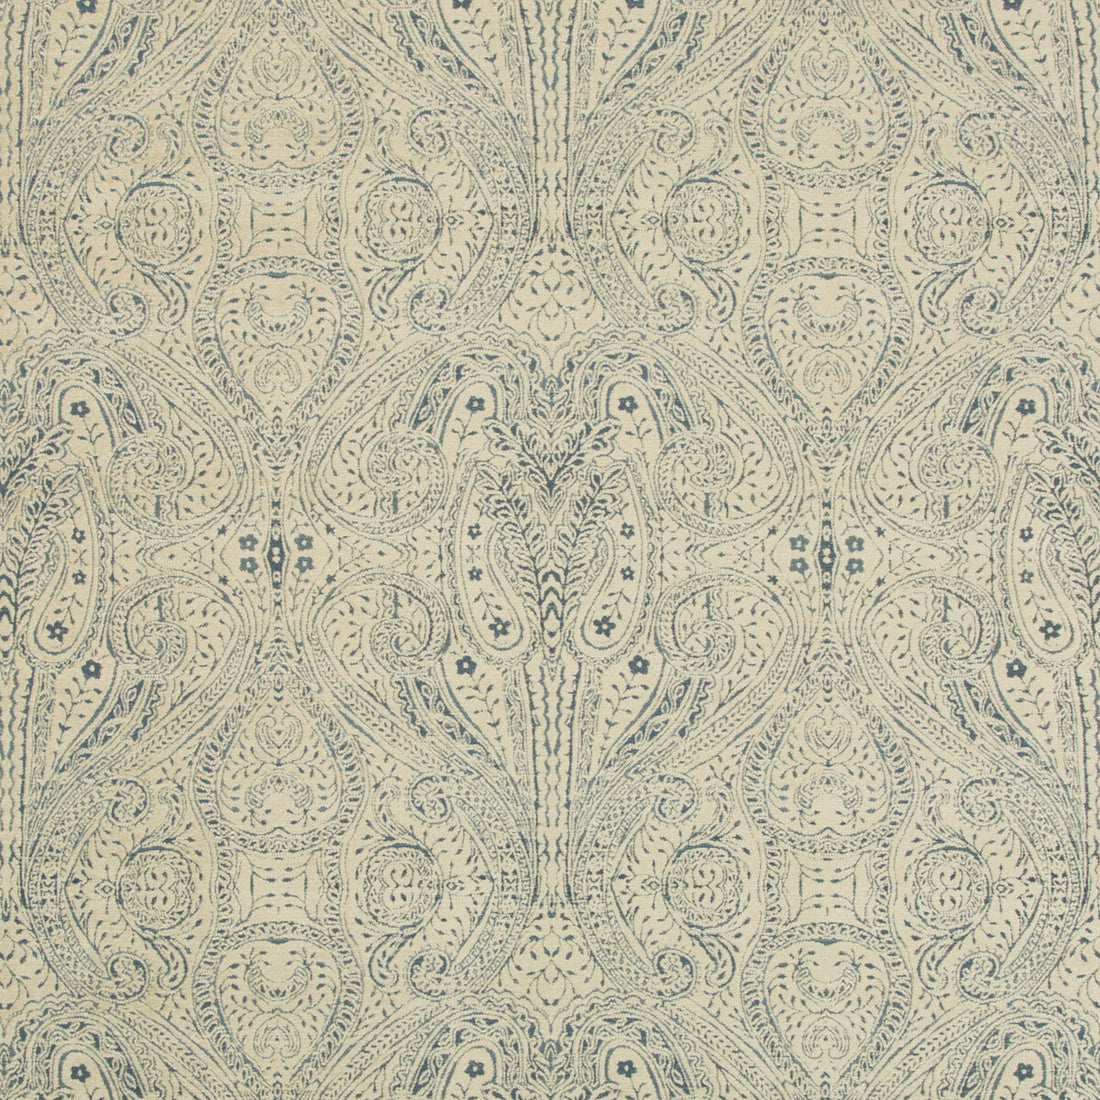 Kravet Design fabric in 35007-516 color - pattern 35007.516.0 - by Kravet Design in the Performance Crypton Home collection